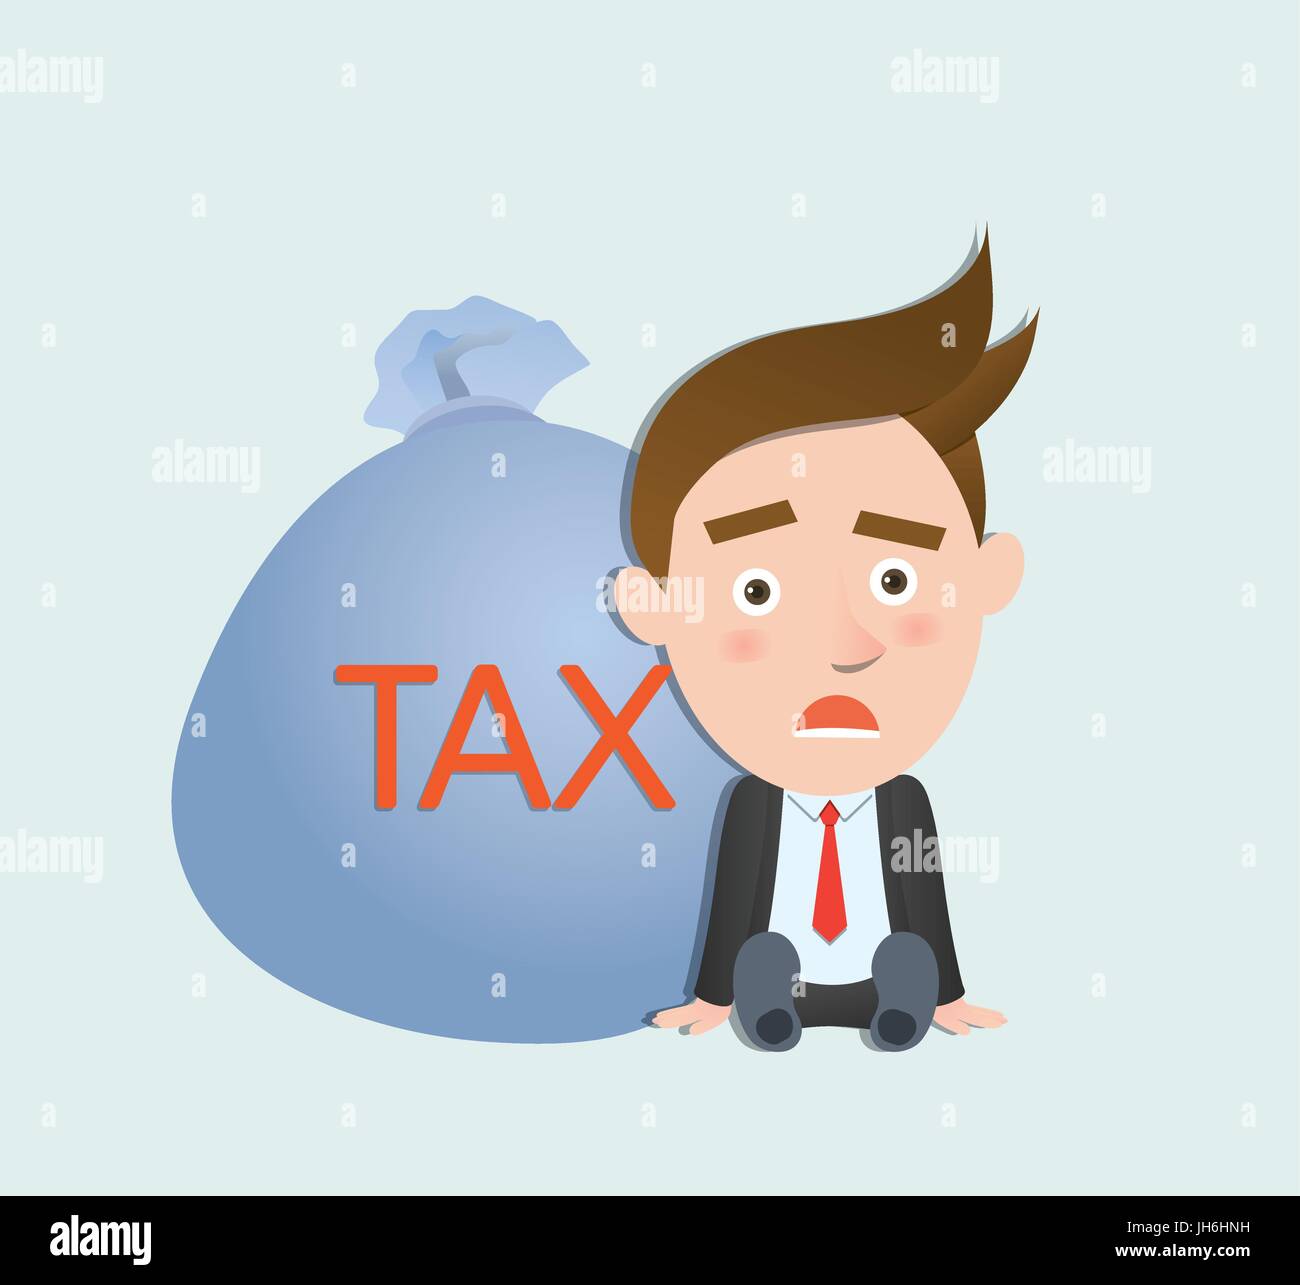 Funny flat character heavy tax business concept Stock Vector